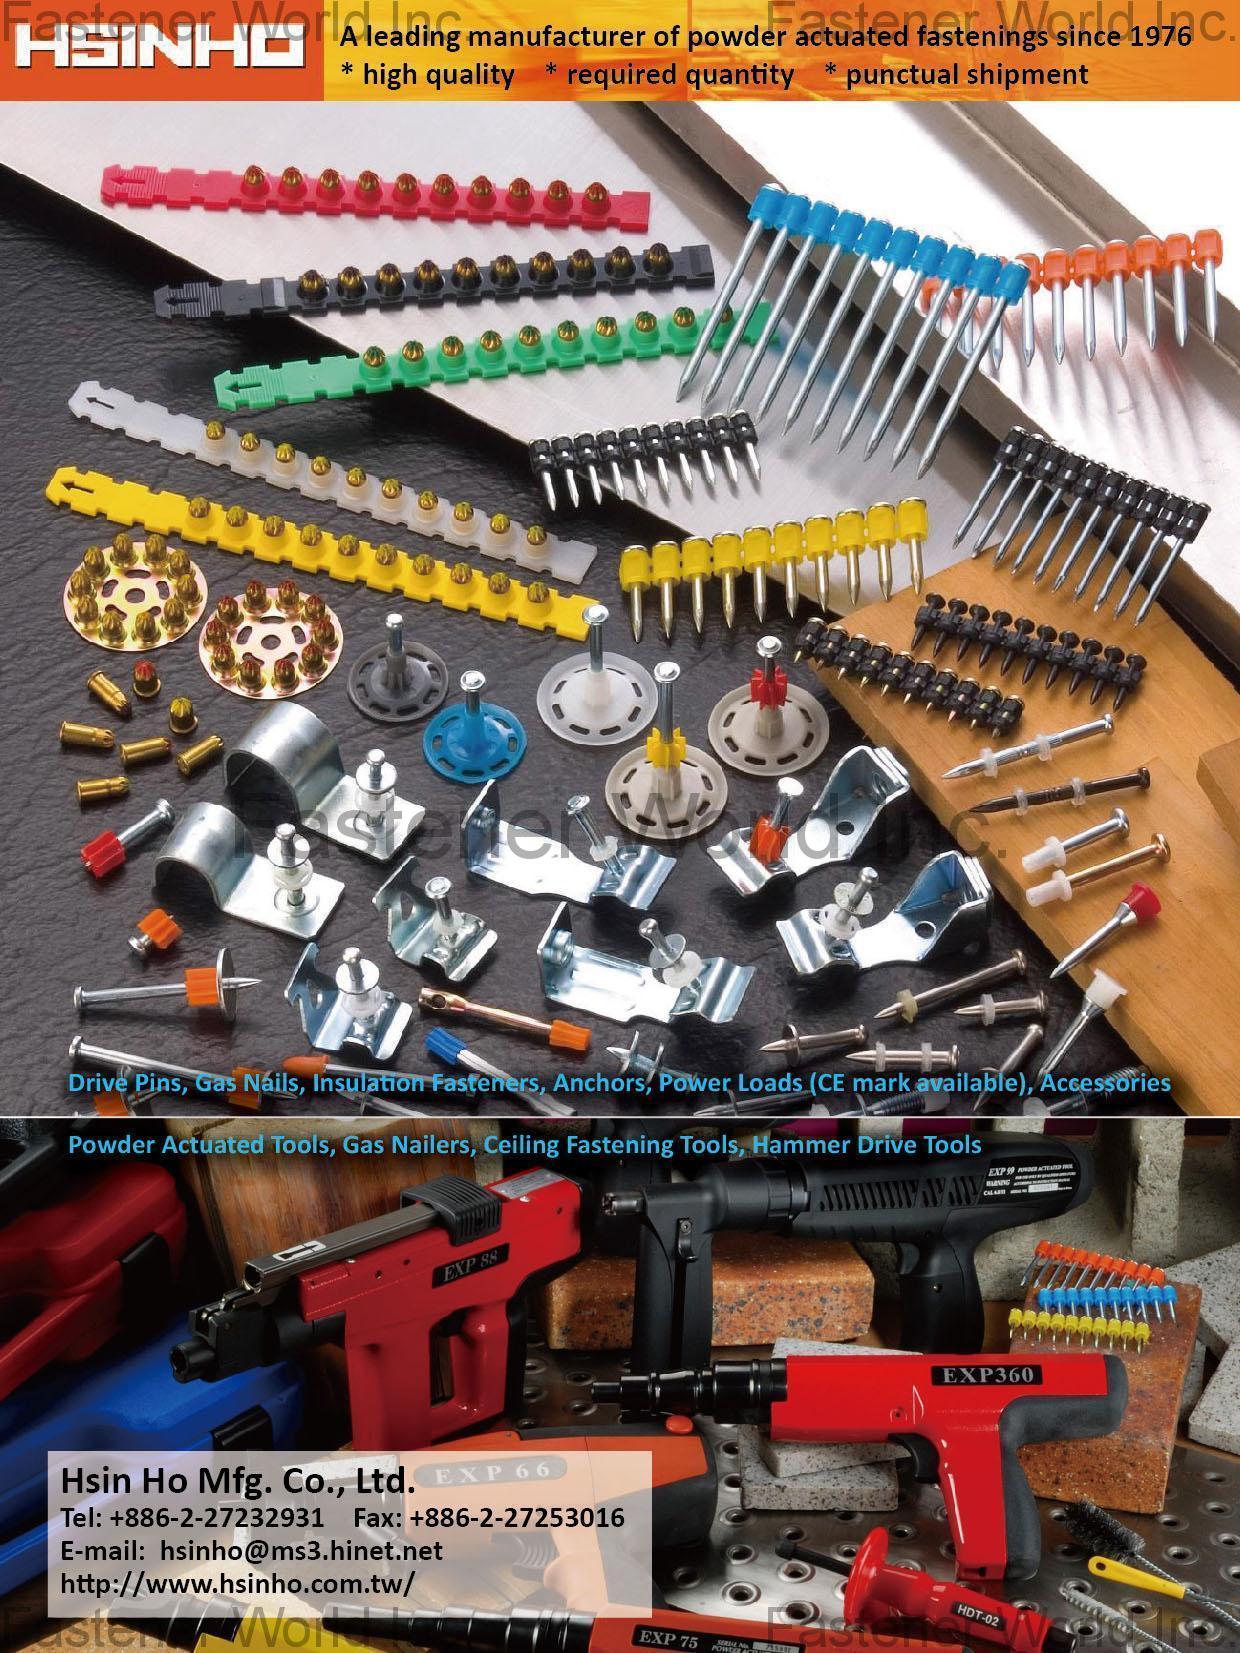 Hsin Ho Mfg. Co., Ltd. , Drive Pins, Gas Nails, Insulation Fasteners, Anchors, Power Loads (CE mark available), Accessories, Powder Actuated Tools, Gas Nailers, Ceiling Fastening Tools, Hammer Drive Tools , Masonry Nails